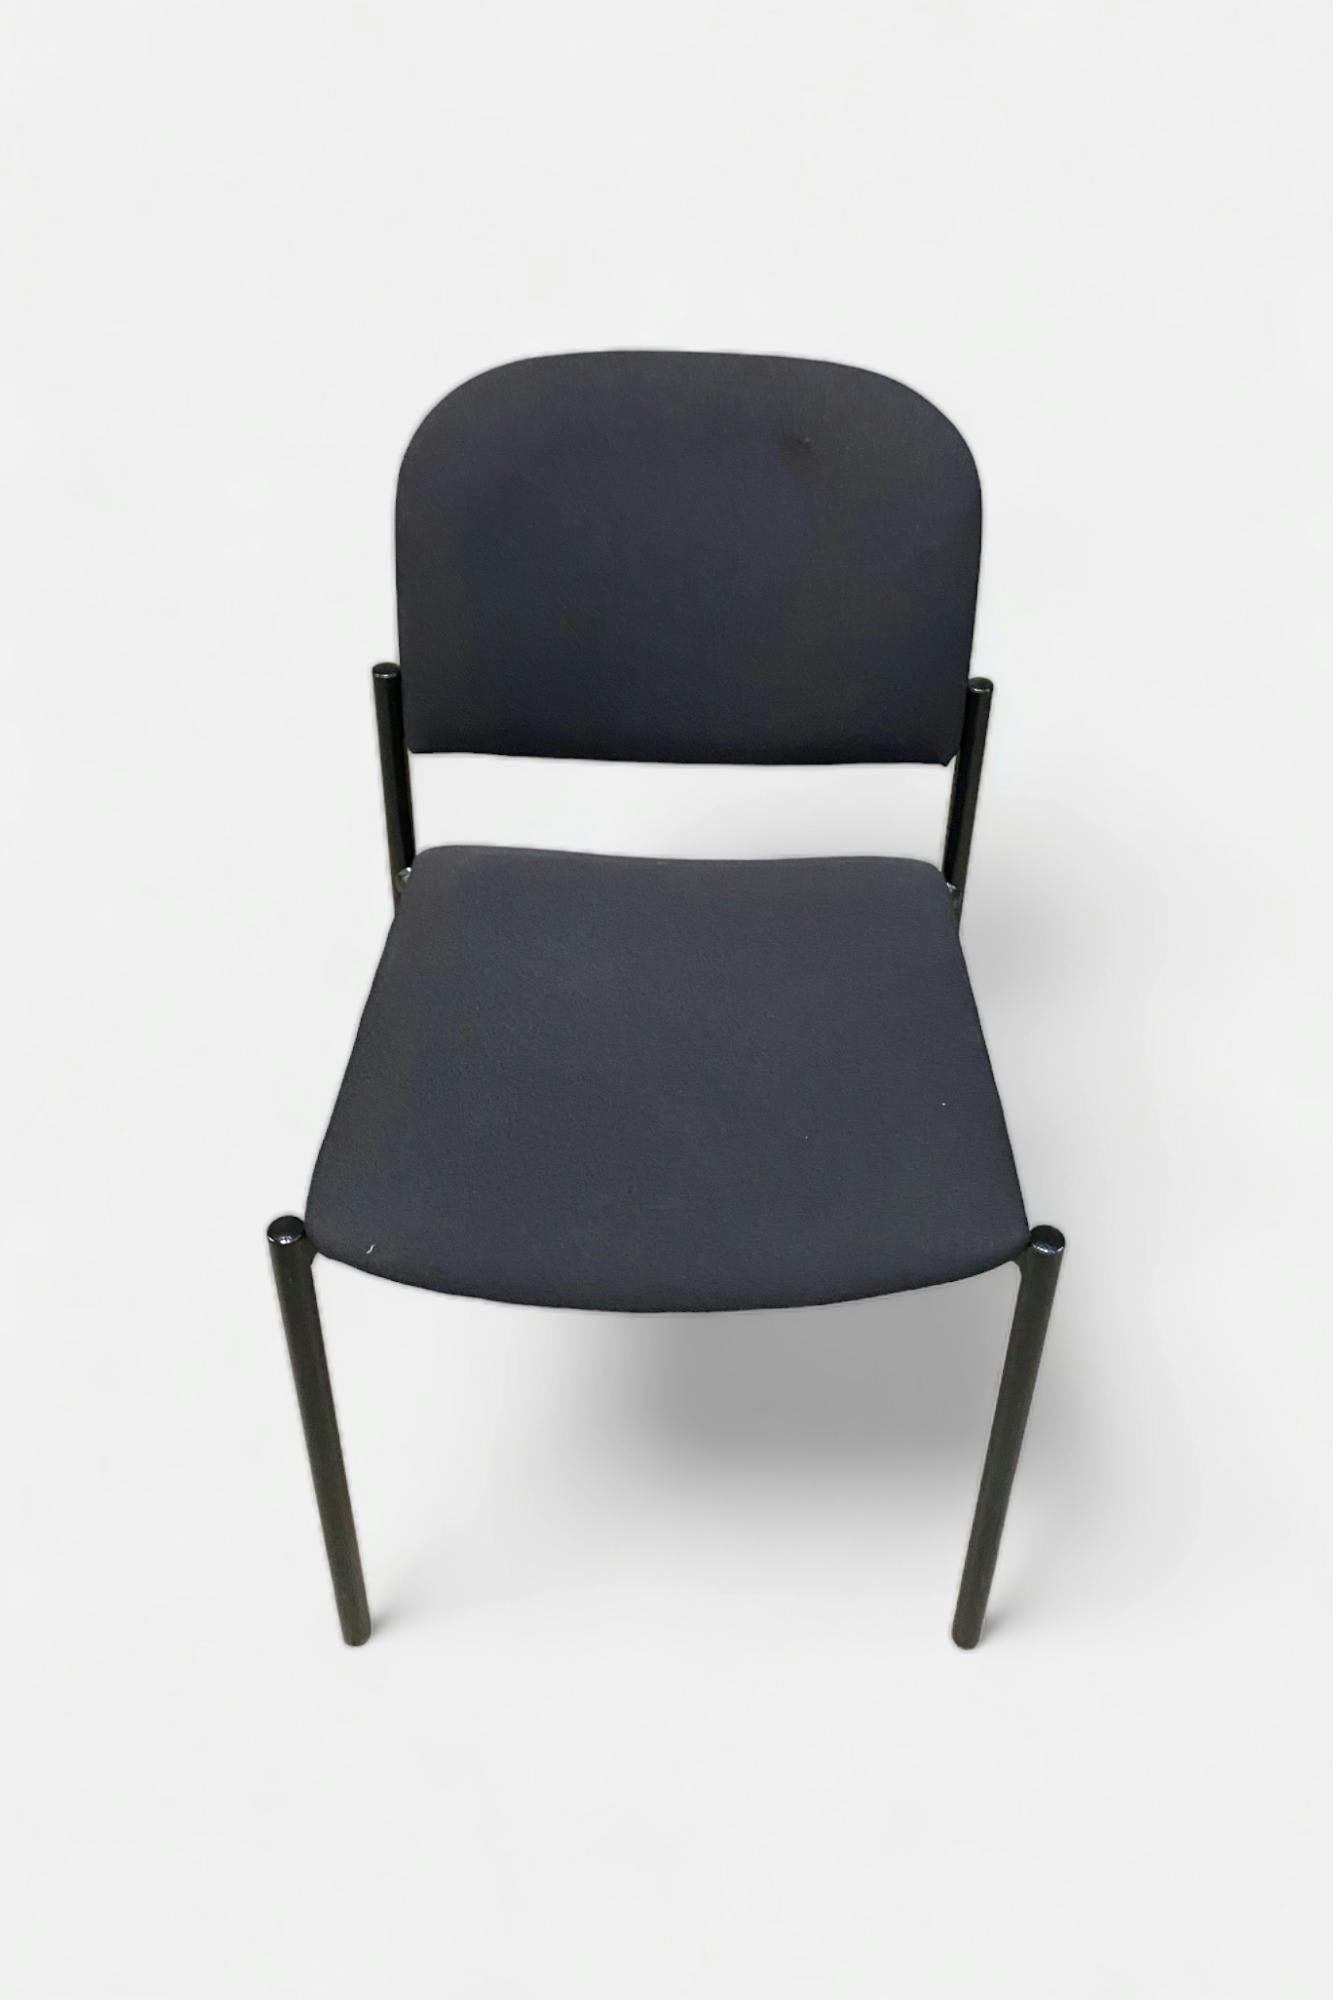 Black meeting stackable chair with black legs - Relieve Furniture